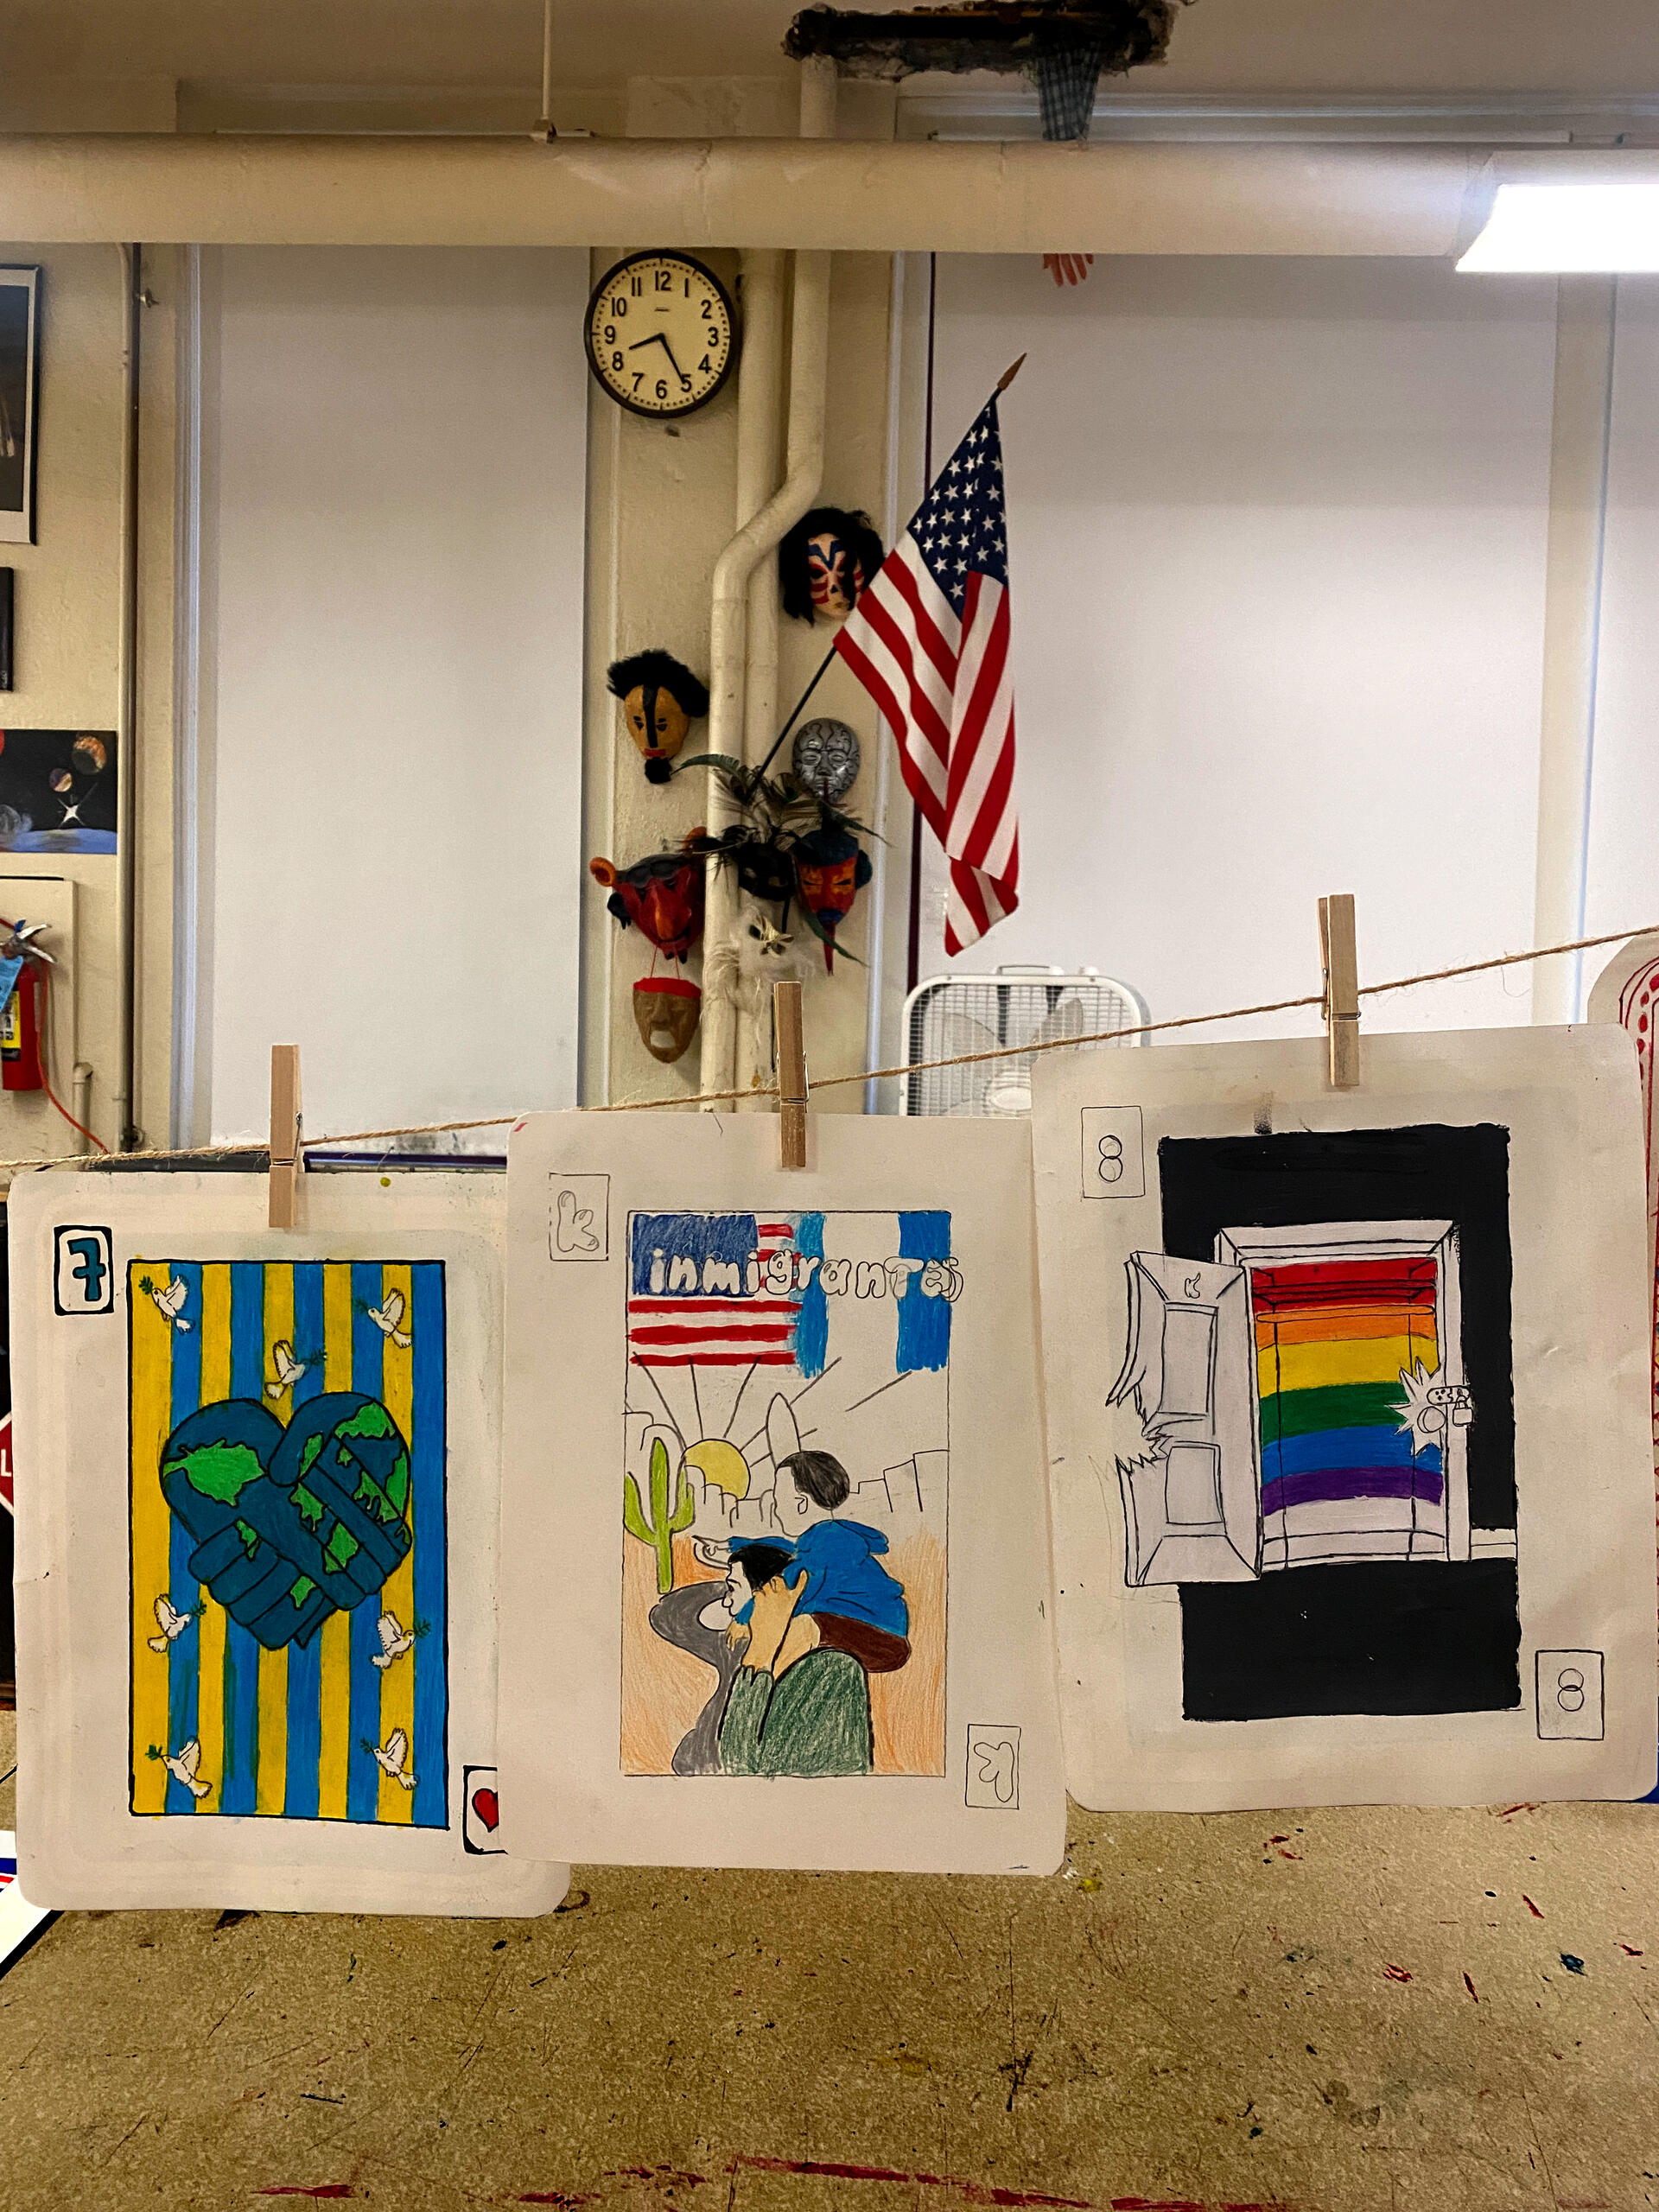 An assortment of drawings in the format of playing cards are suspended in from on a classroom wall with an American flag. Topics of the card include world peace, pro-immigration, and LGBTQ rights.